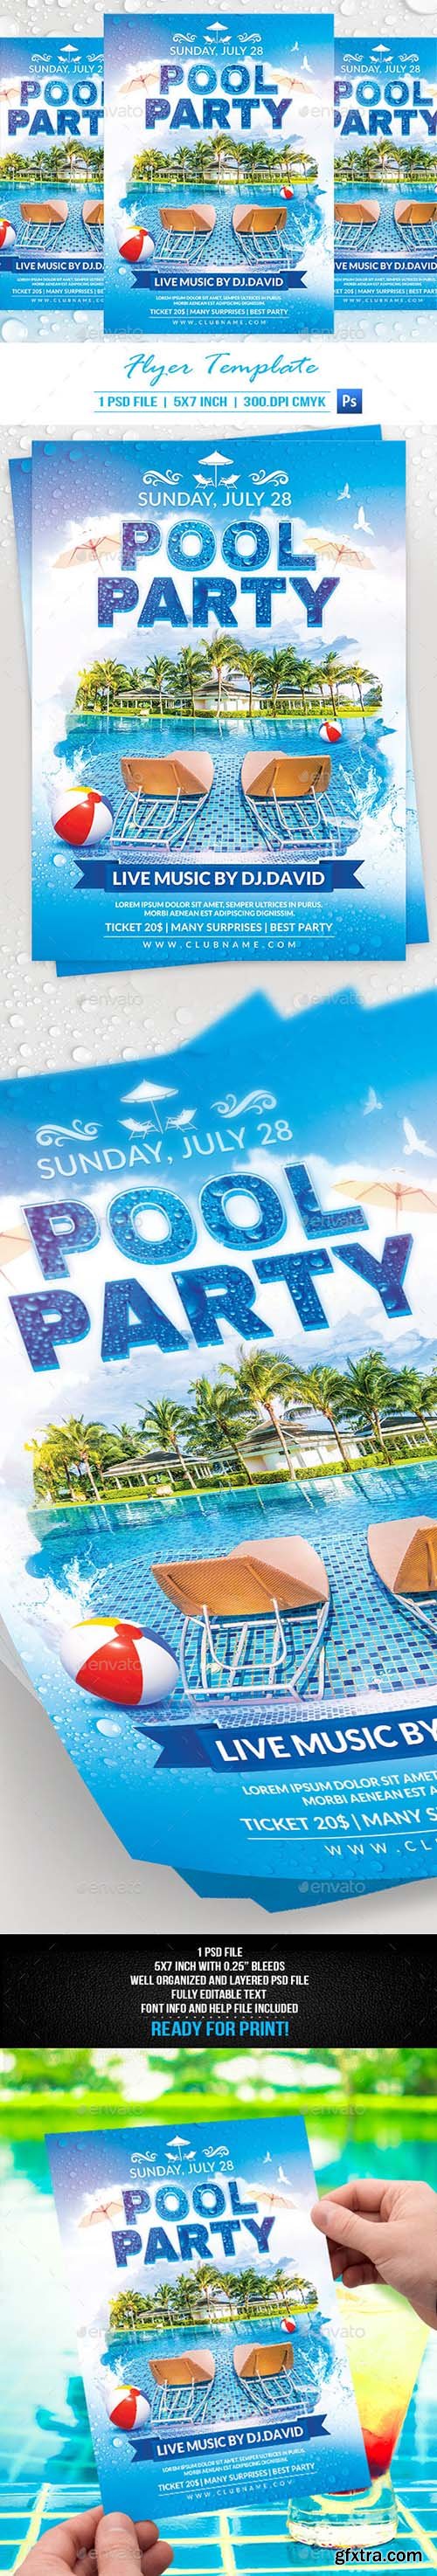 Graphicriver Pool Party Flyer Template 19967044